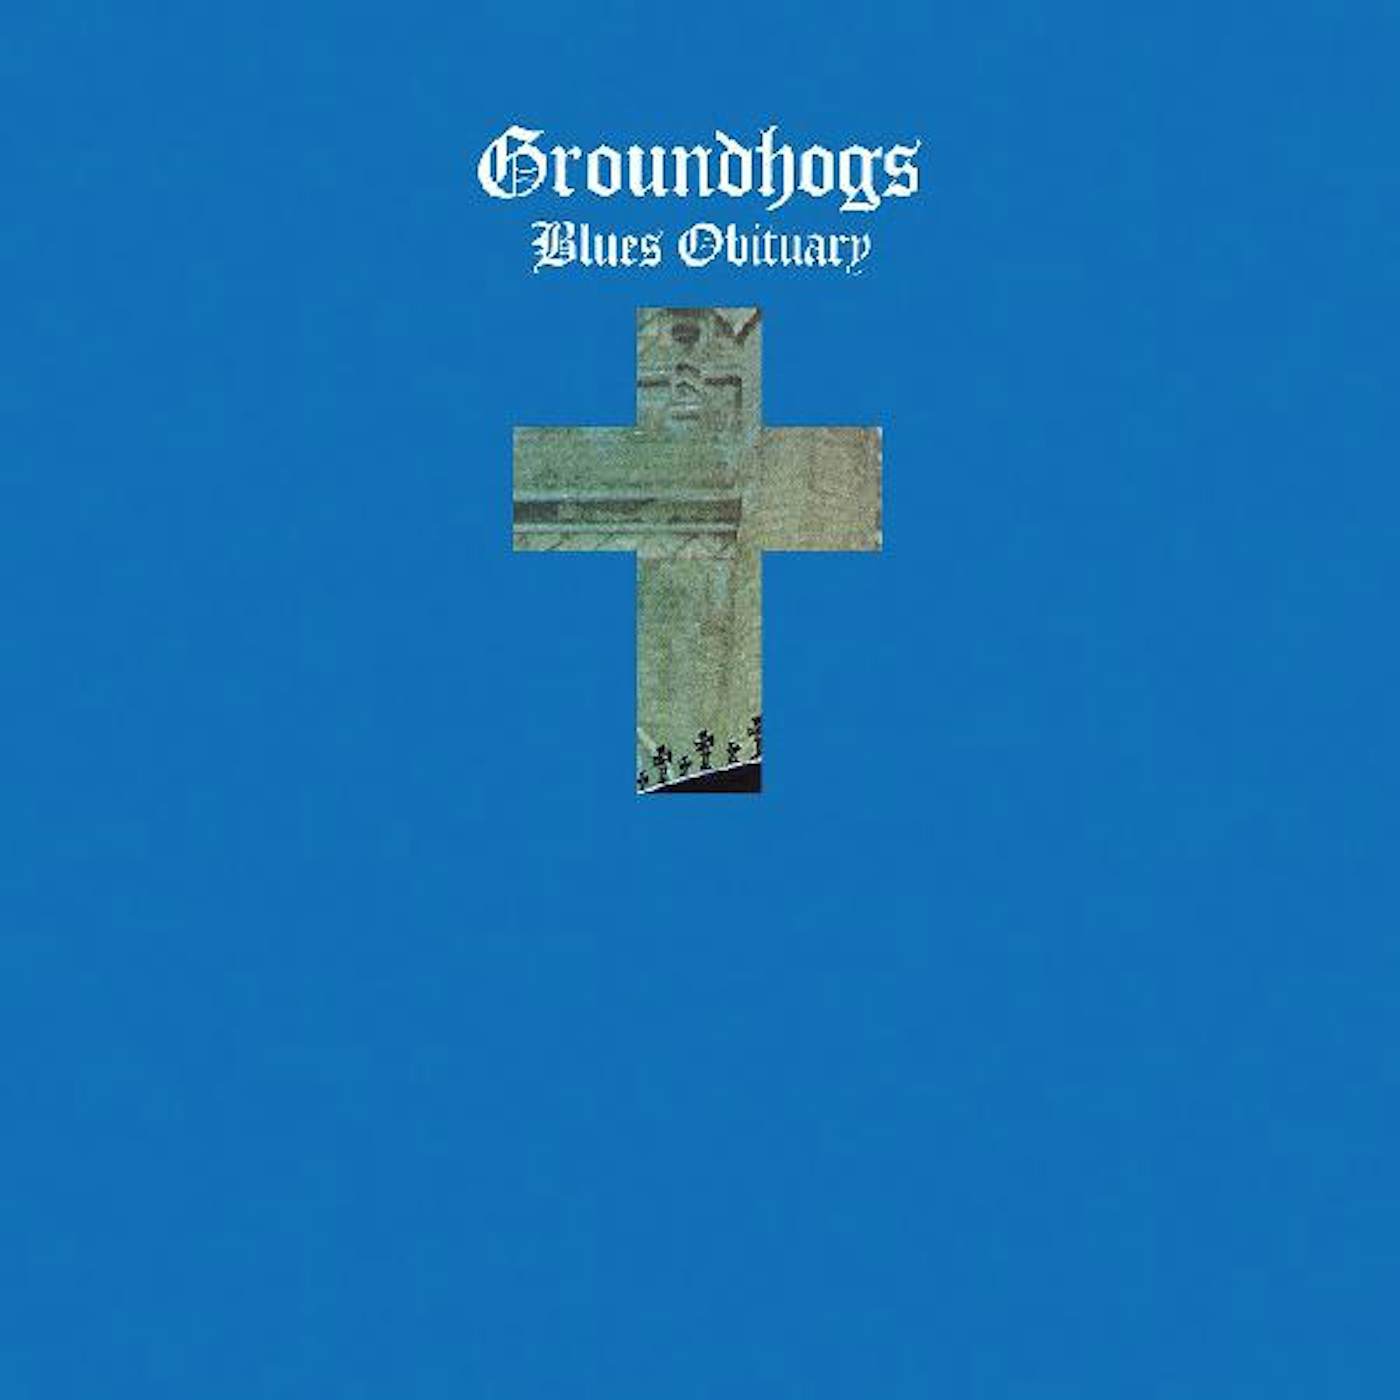 The Groundhogs BLUES OBITUARY CD